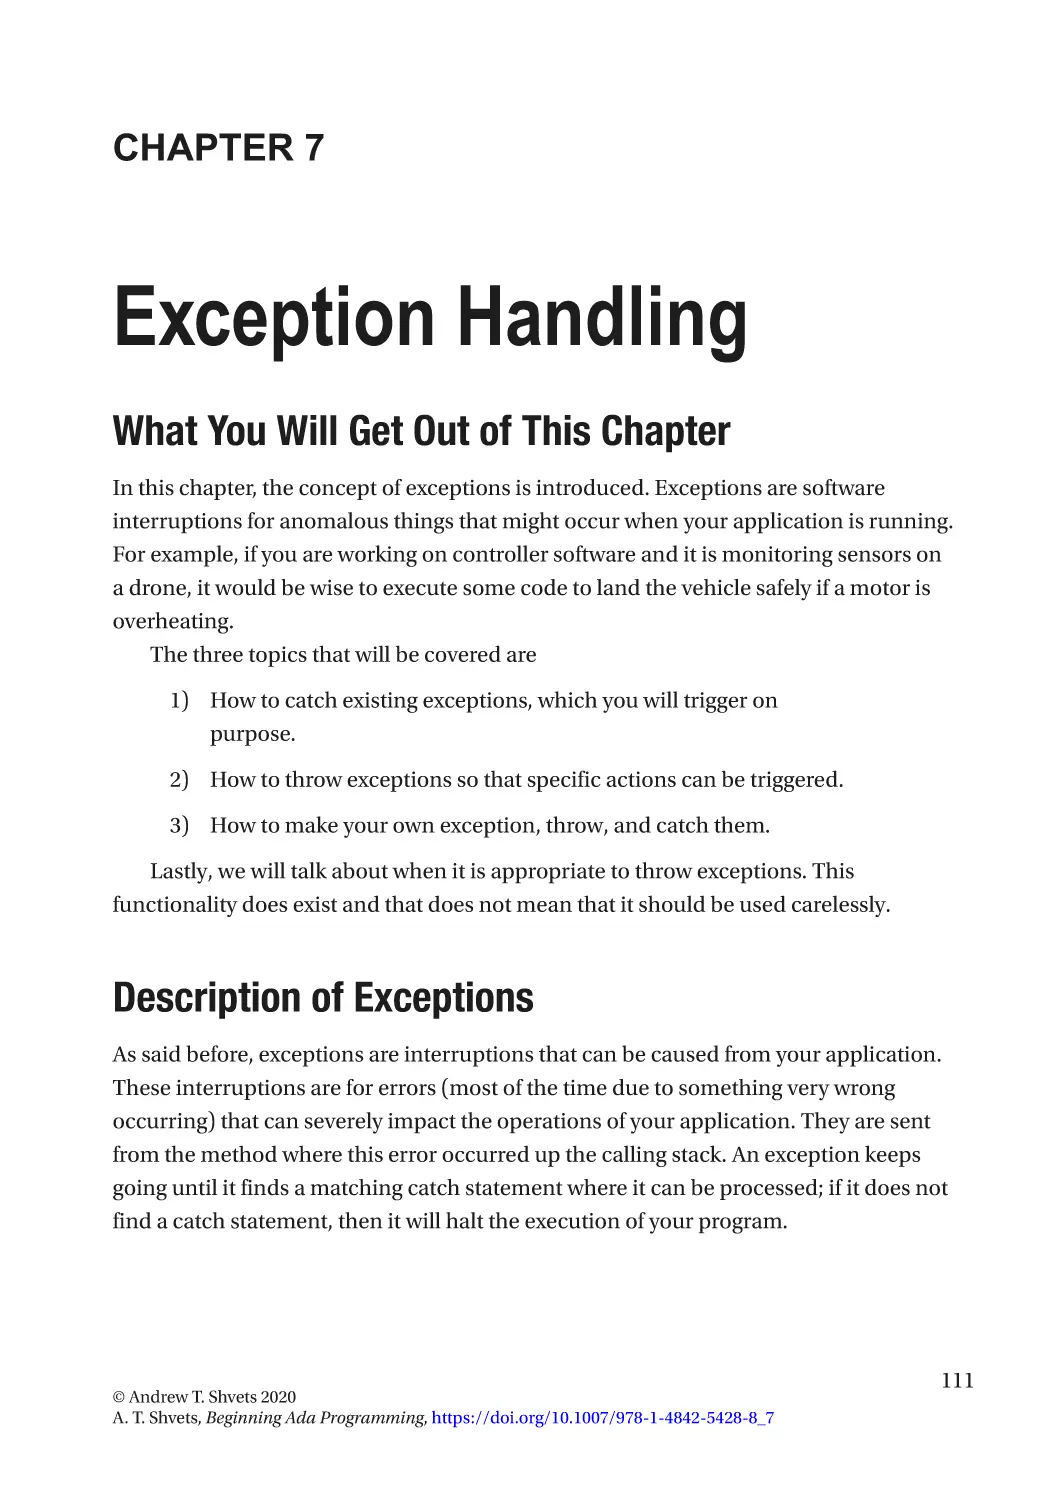 Chapter 7
What You Will Get Out of This Chapter
Description of Exceptions